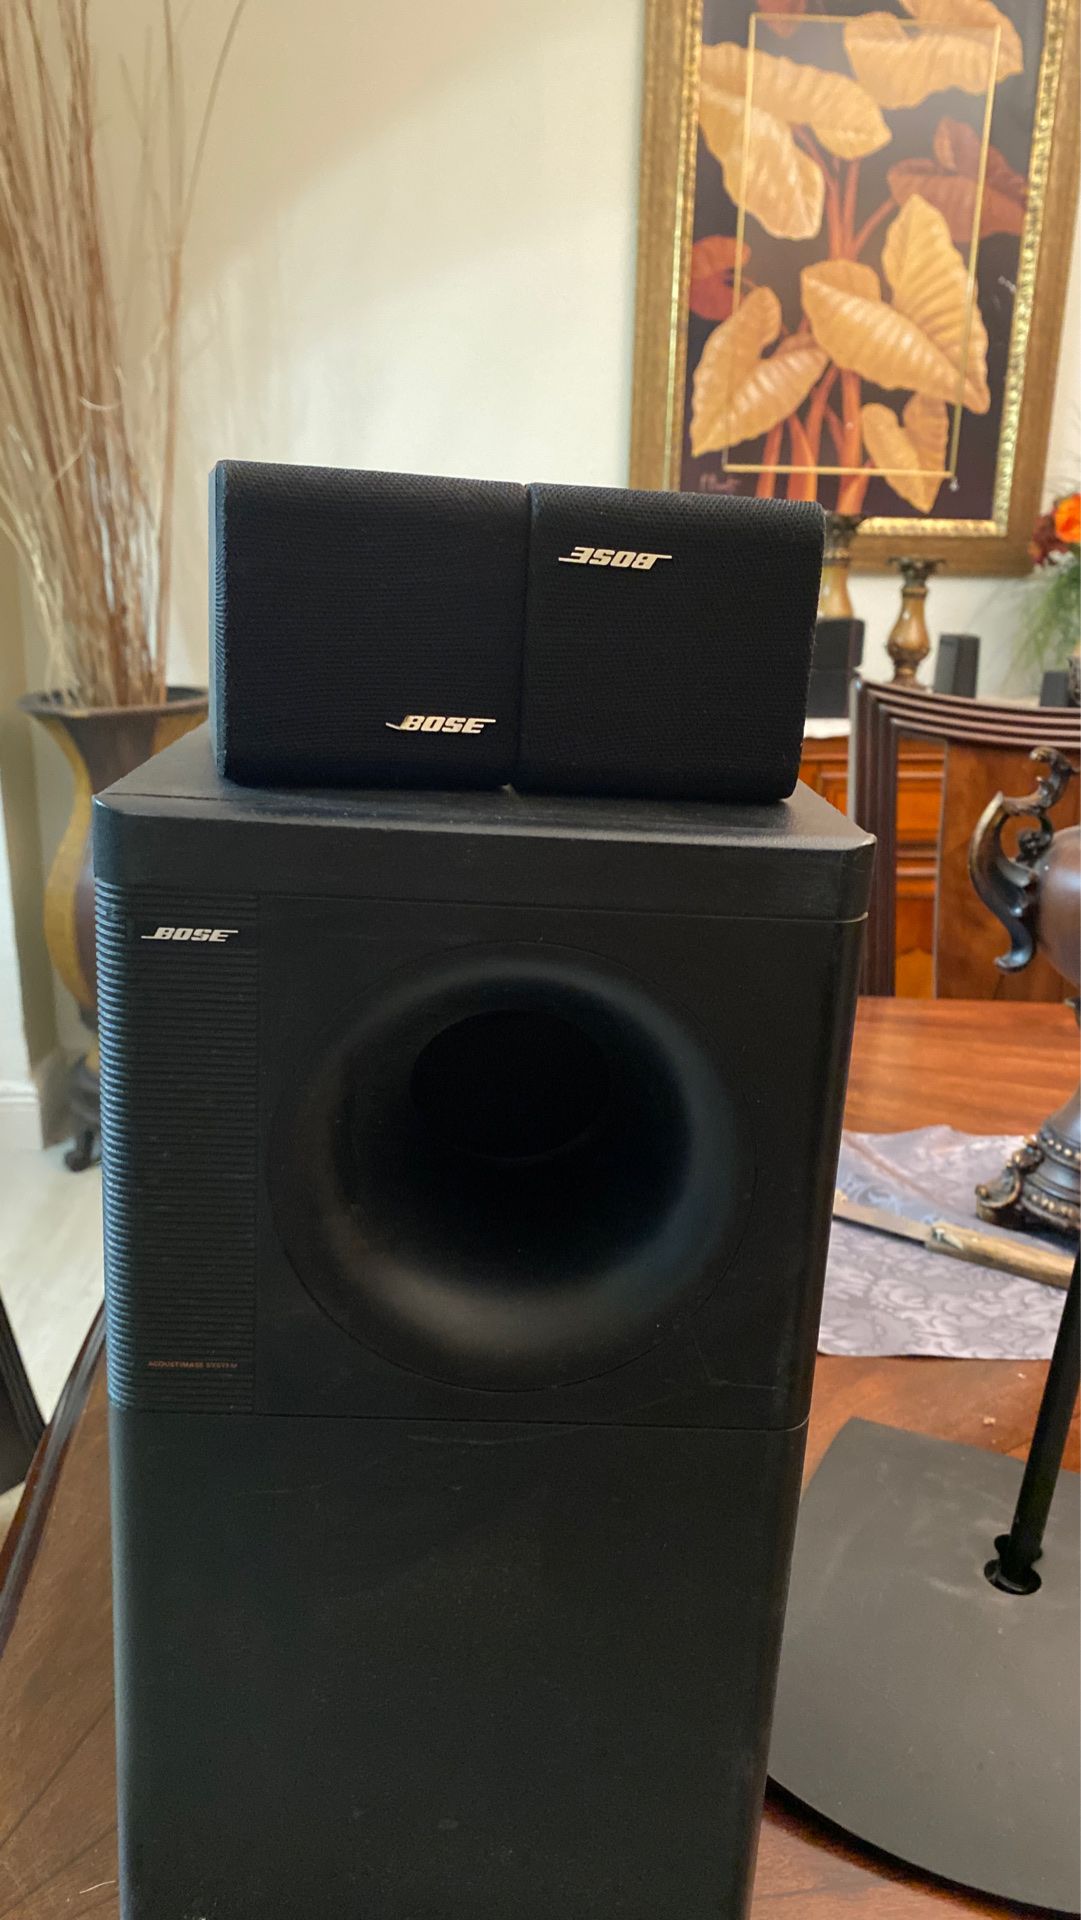 Bose speakers and subwoofer (2 stands included)